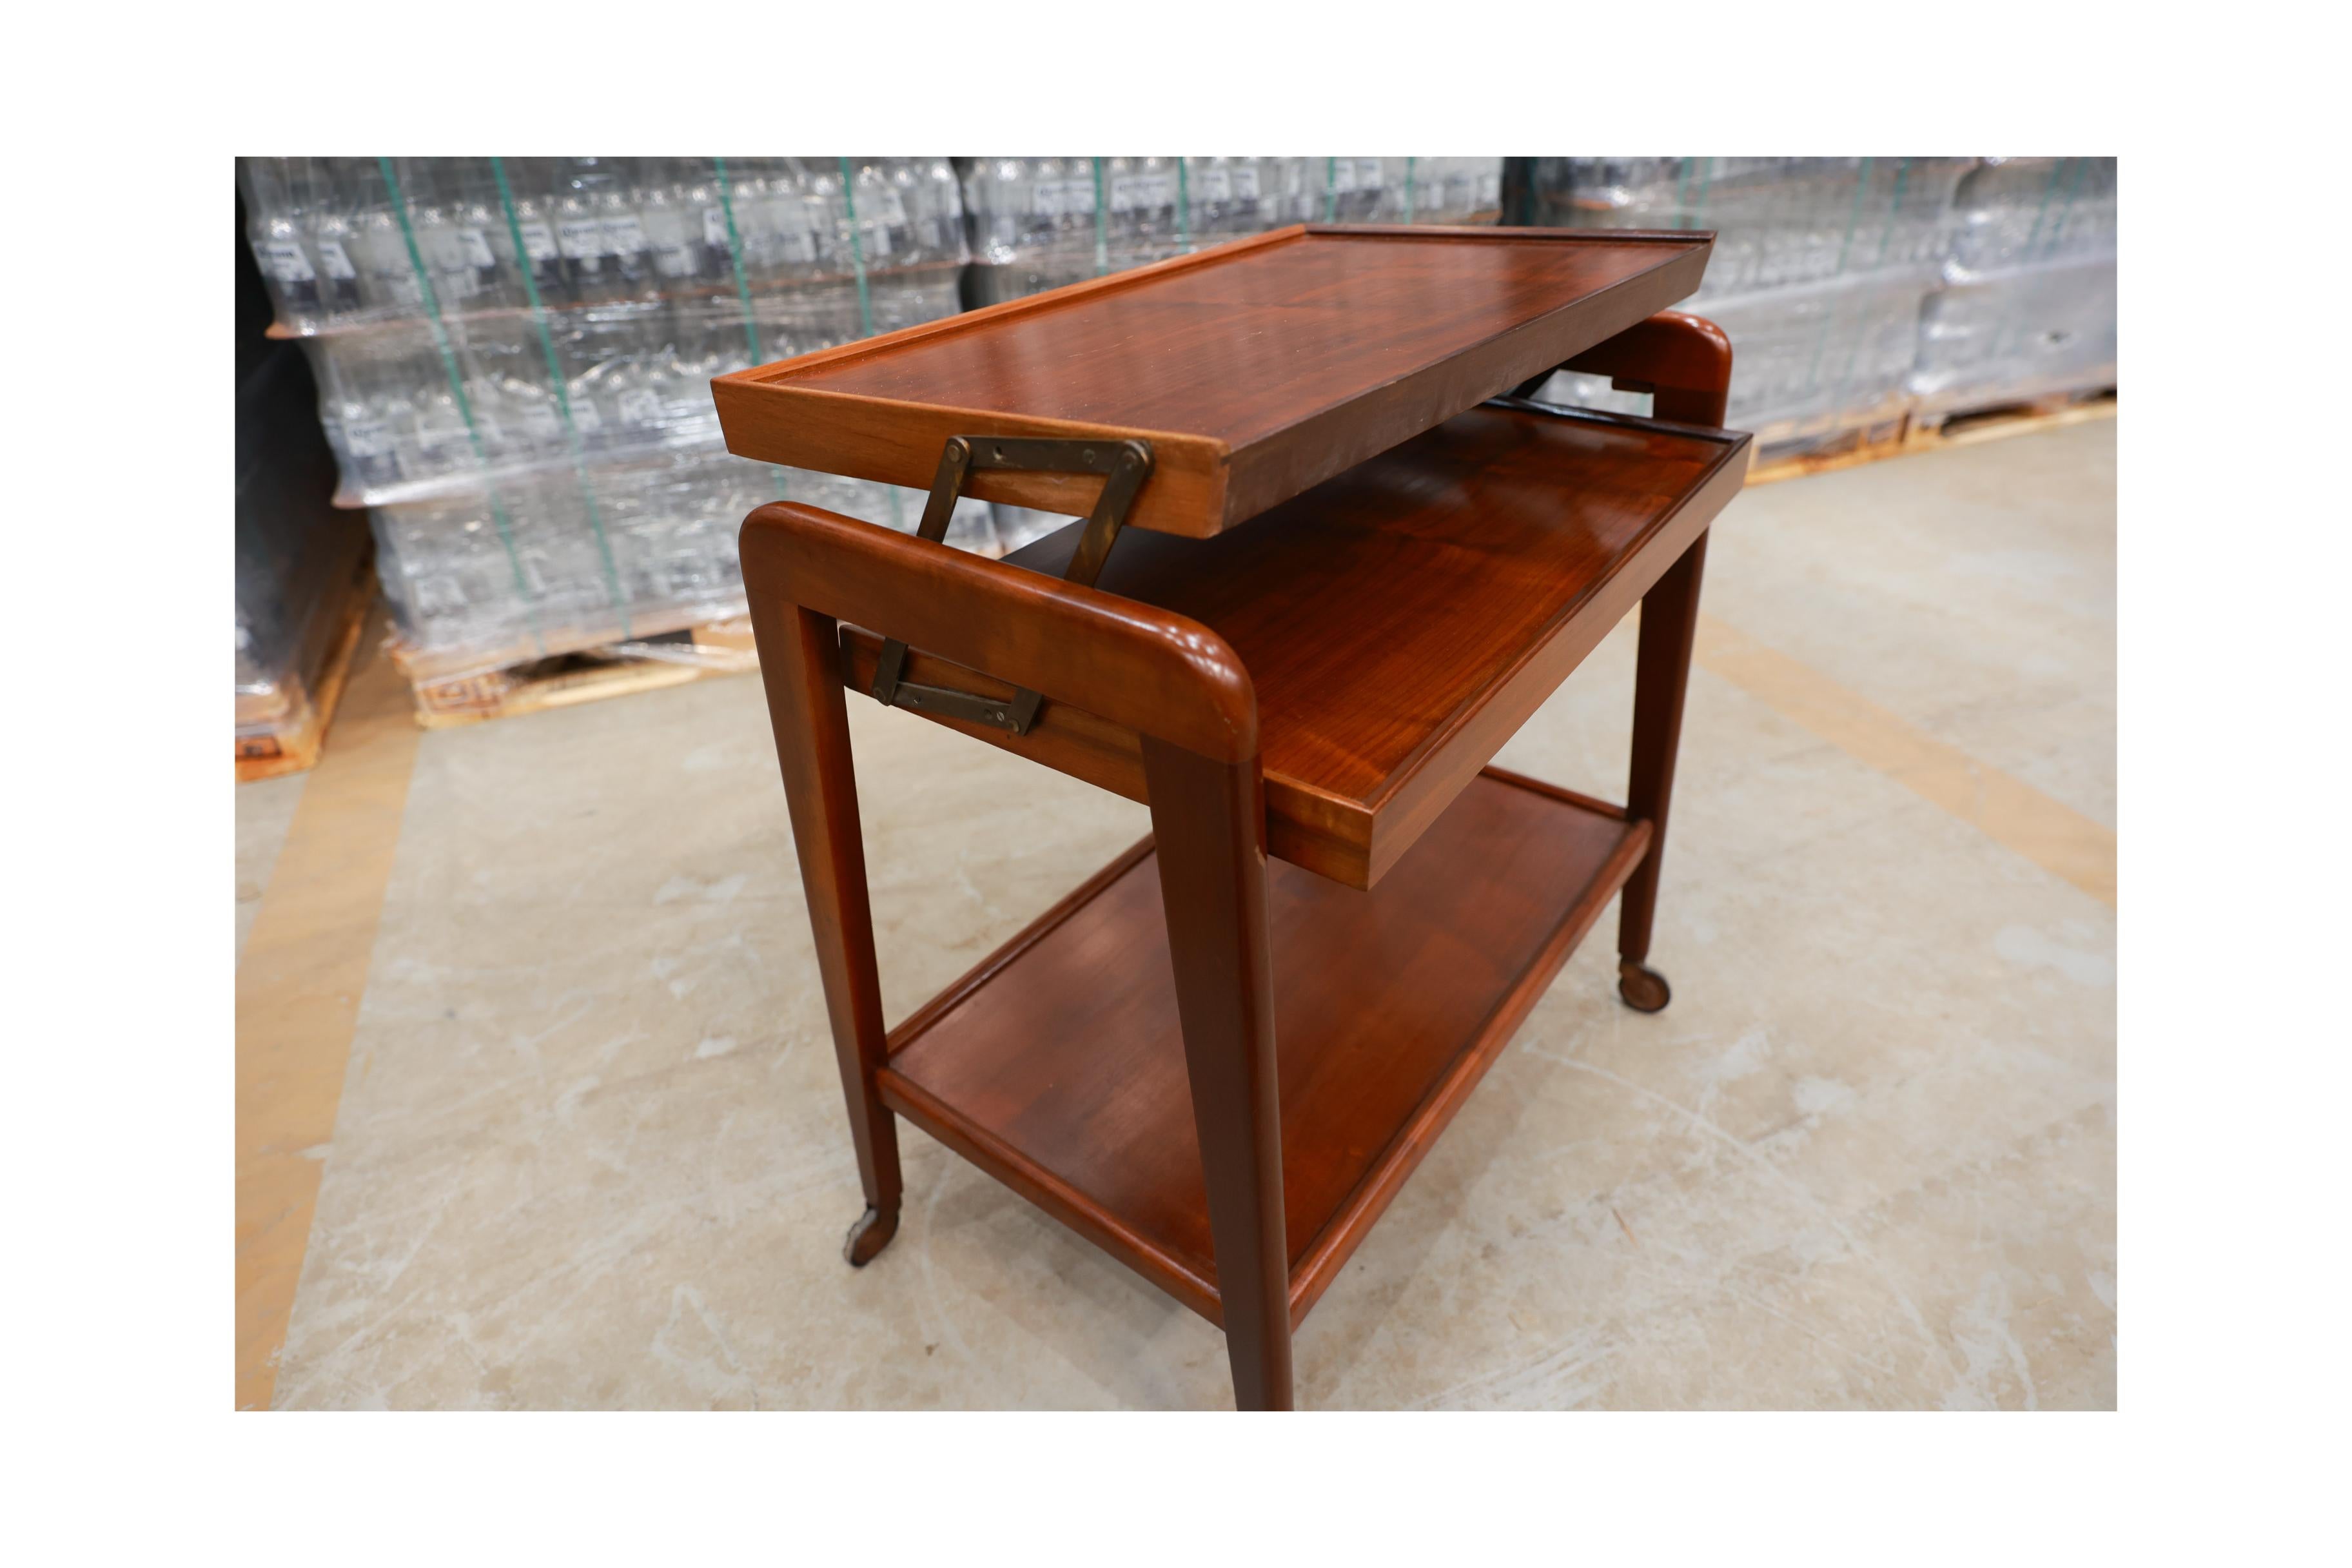 Midcentury Modern Bar Cart in Hardwood & Brass by Ming Moveis, Brazil, 1950's For Sale 3